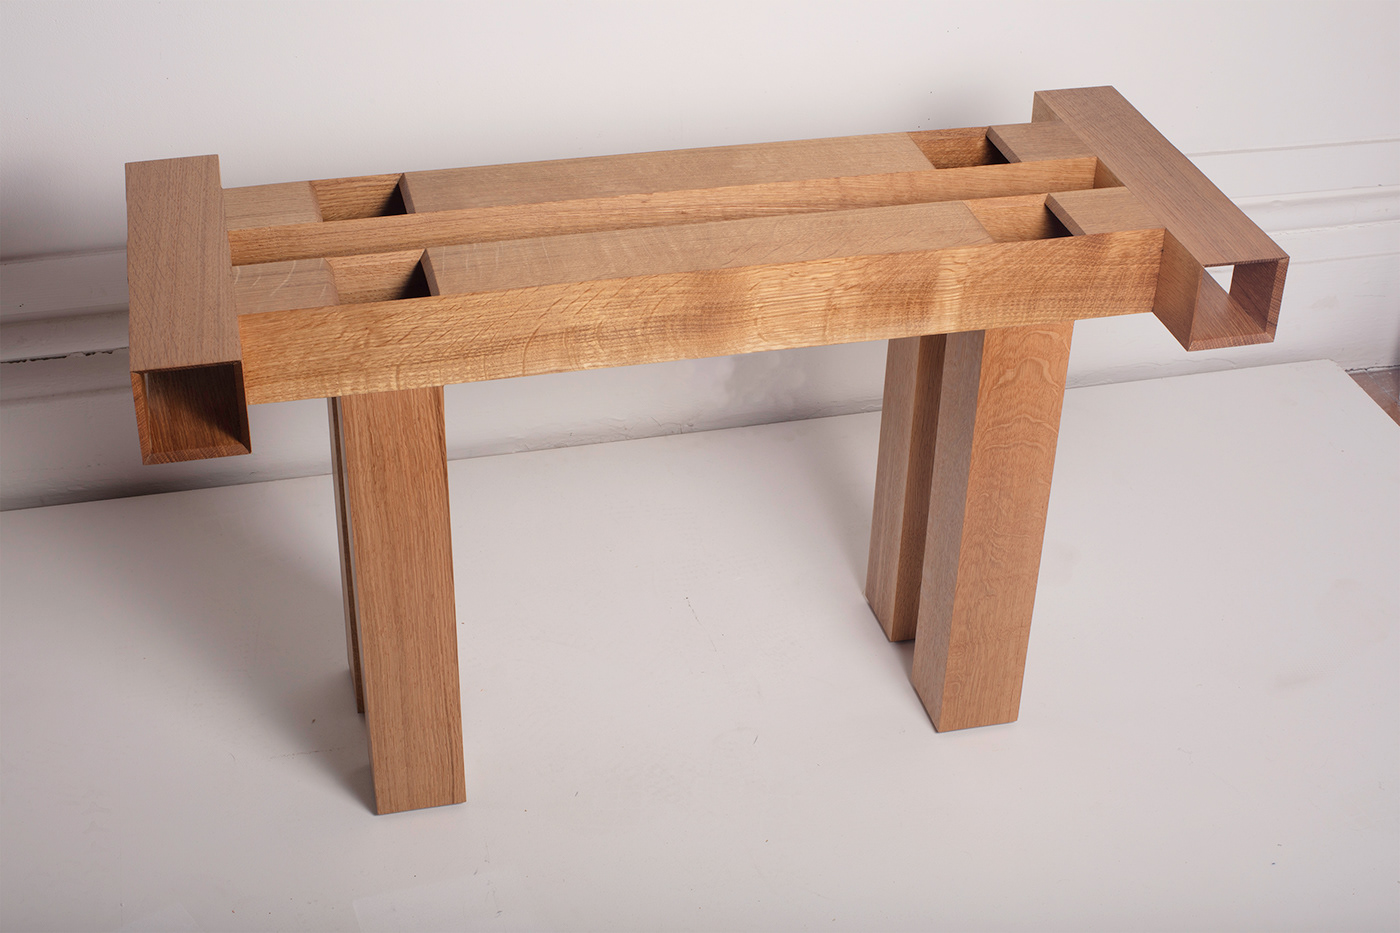 wood structure hollow furniture bench craft mitre